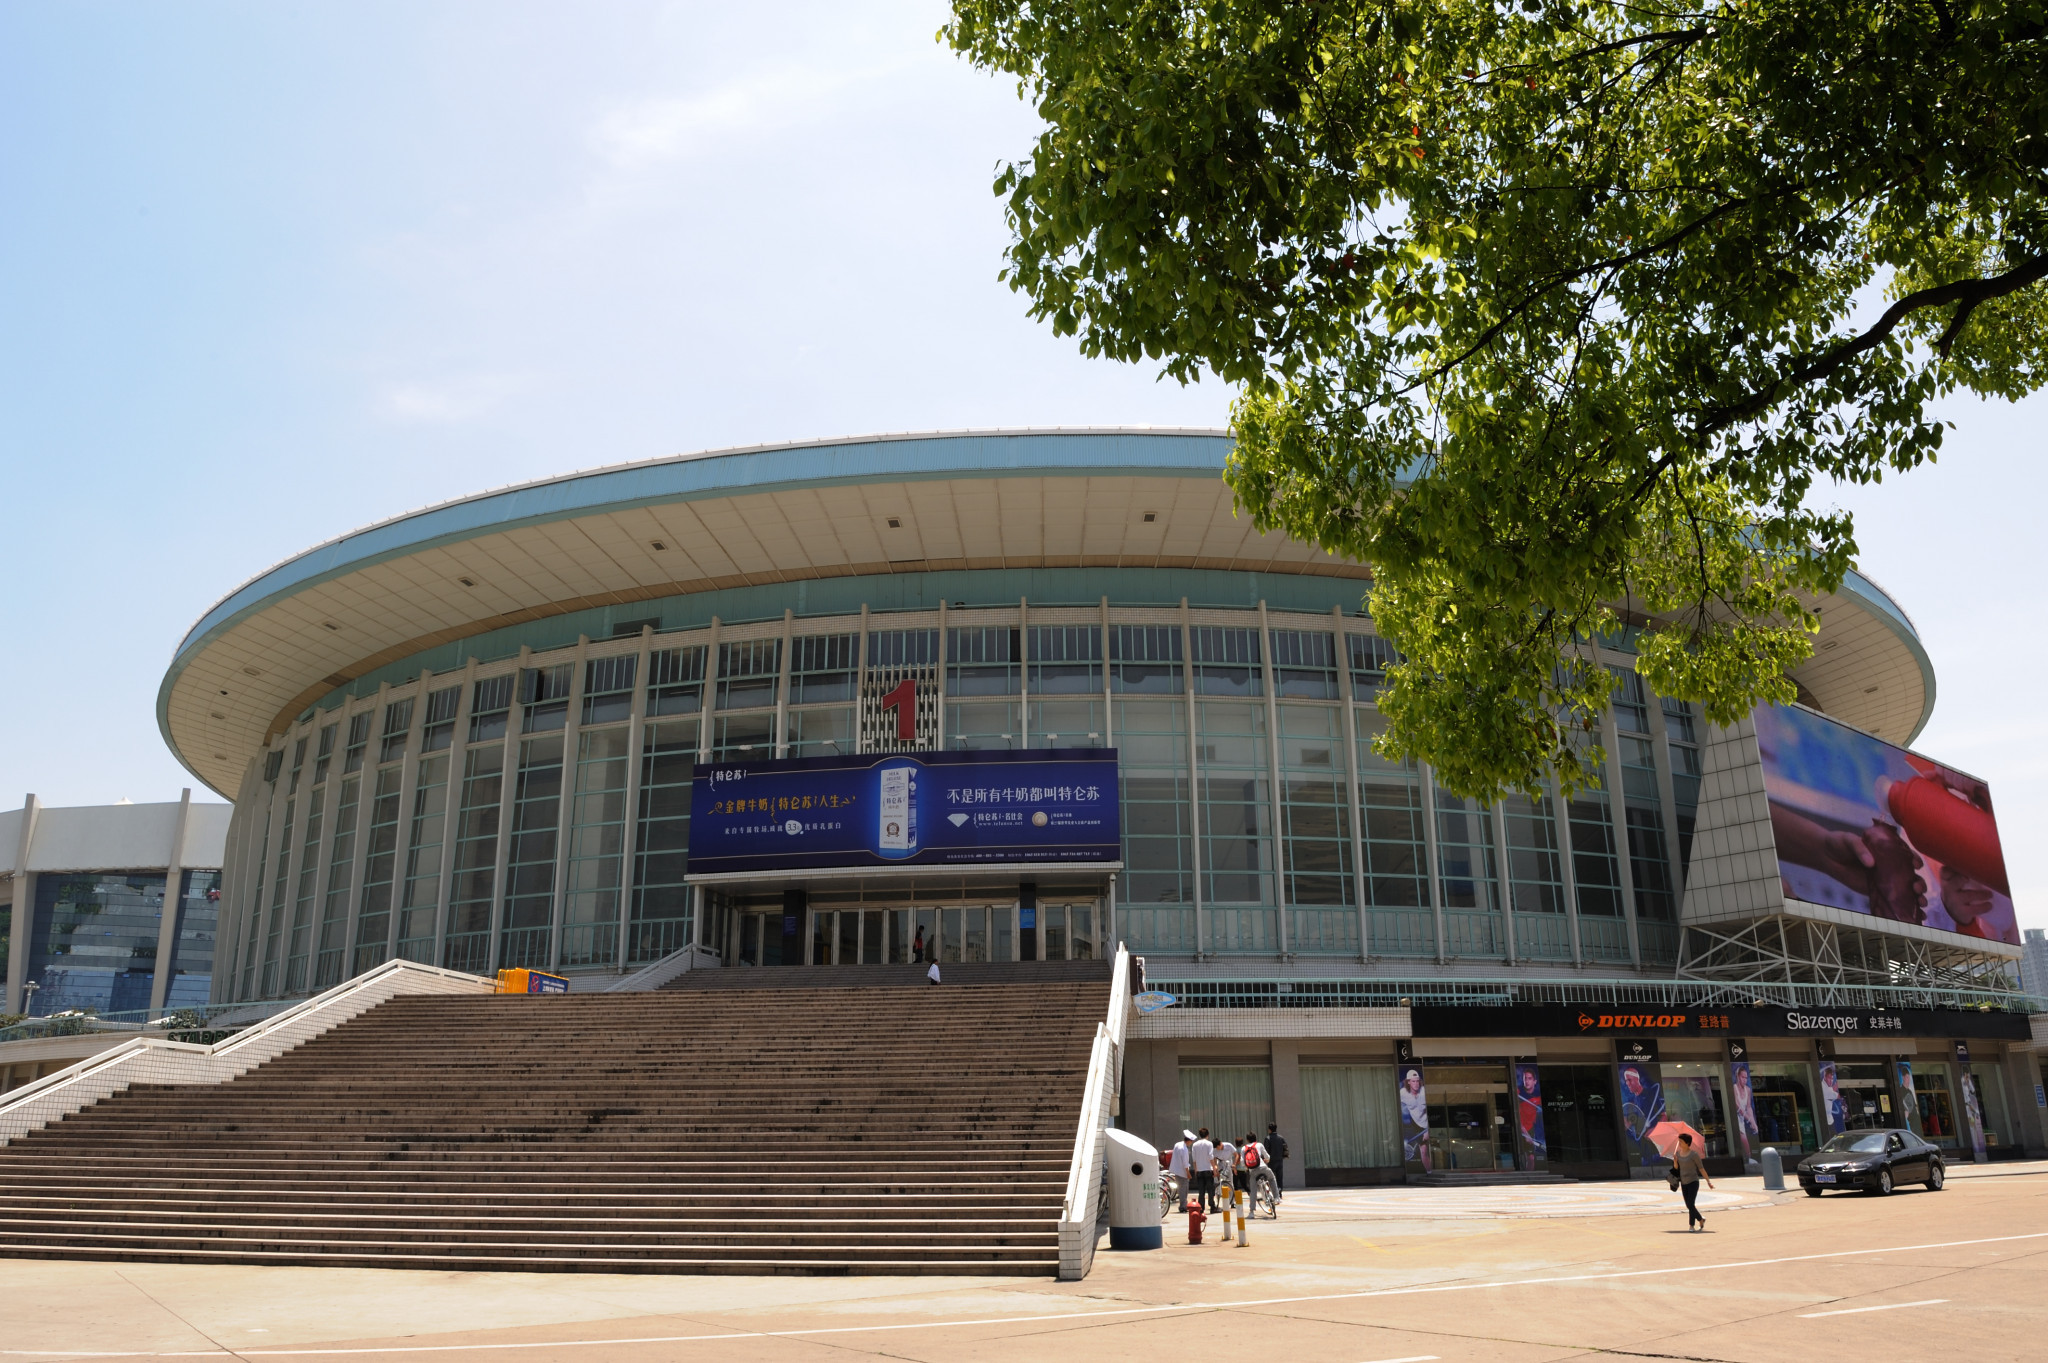 Minhang Indoor Stadium will host the 15th edition of the Wushu World Championships ©Wikipedia